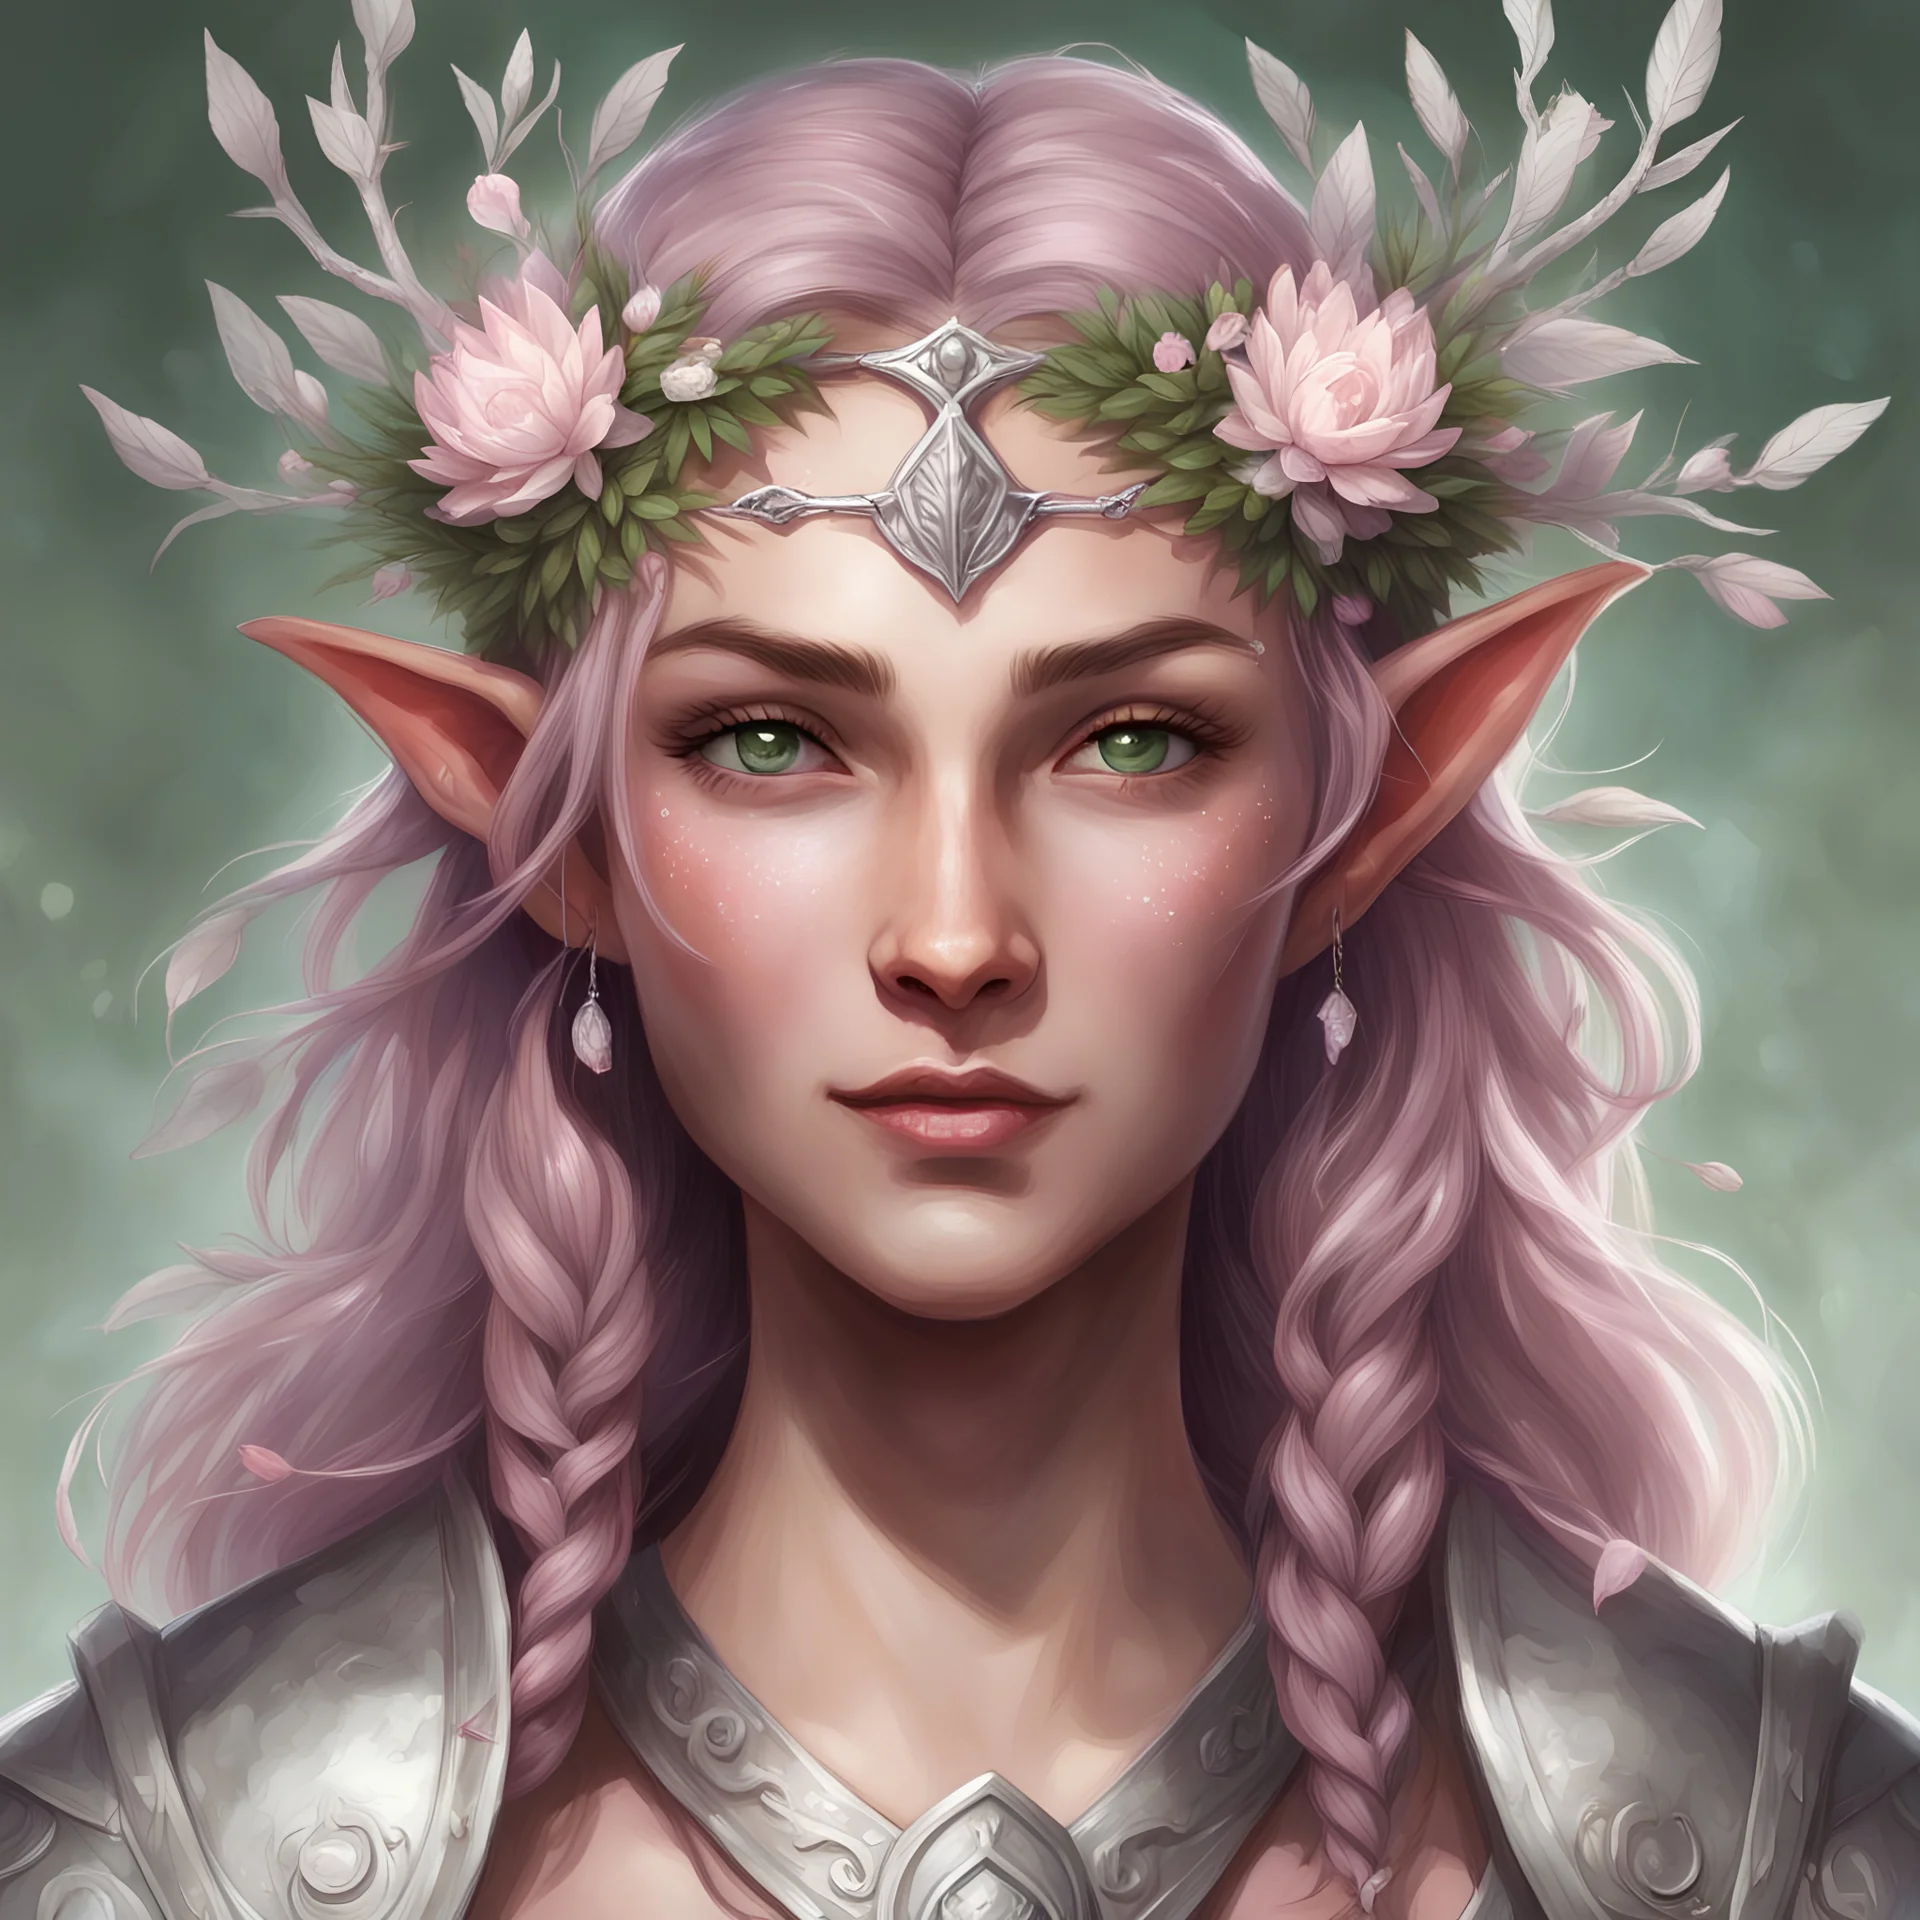 Generate a dungeons and dragons character portrait of the face of a female spring Eladrin. She is a circle of the Shepard Druid who's is dedicated to protecting magical creatures. She looks sweet and approachable. She wears a dainty circlet made of silver coated branches. Her hair is pink and voluminous, her skin sun-kissed. Her eyes are hazel.